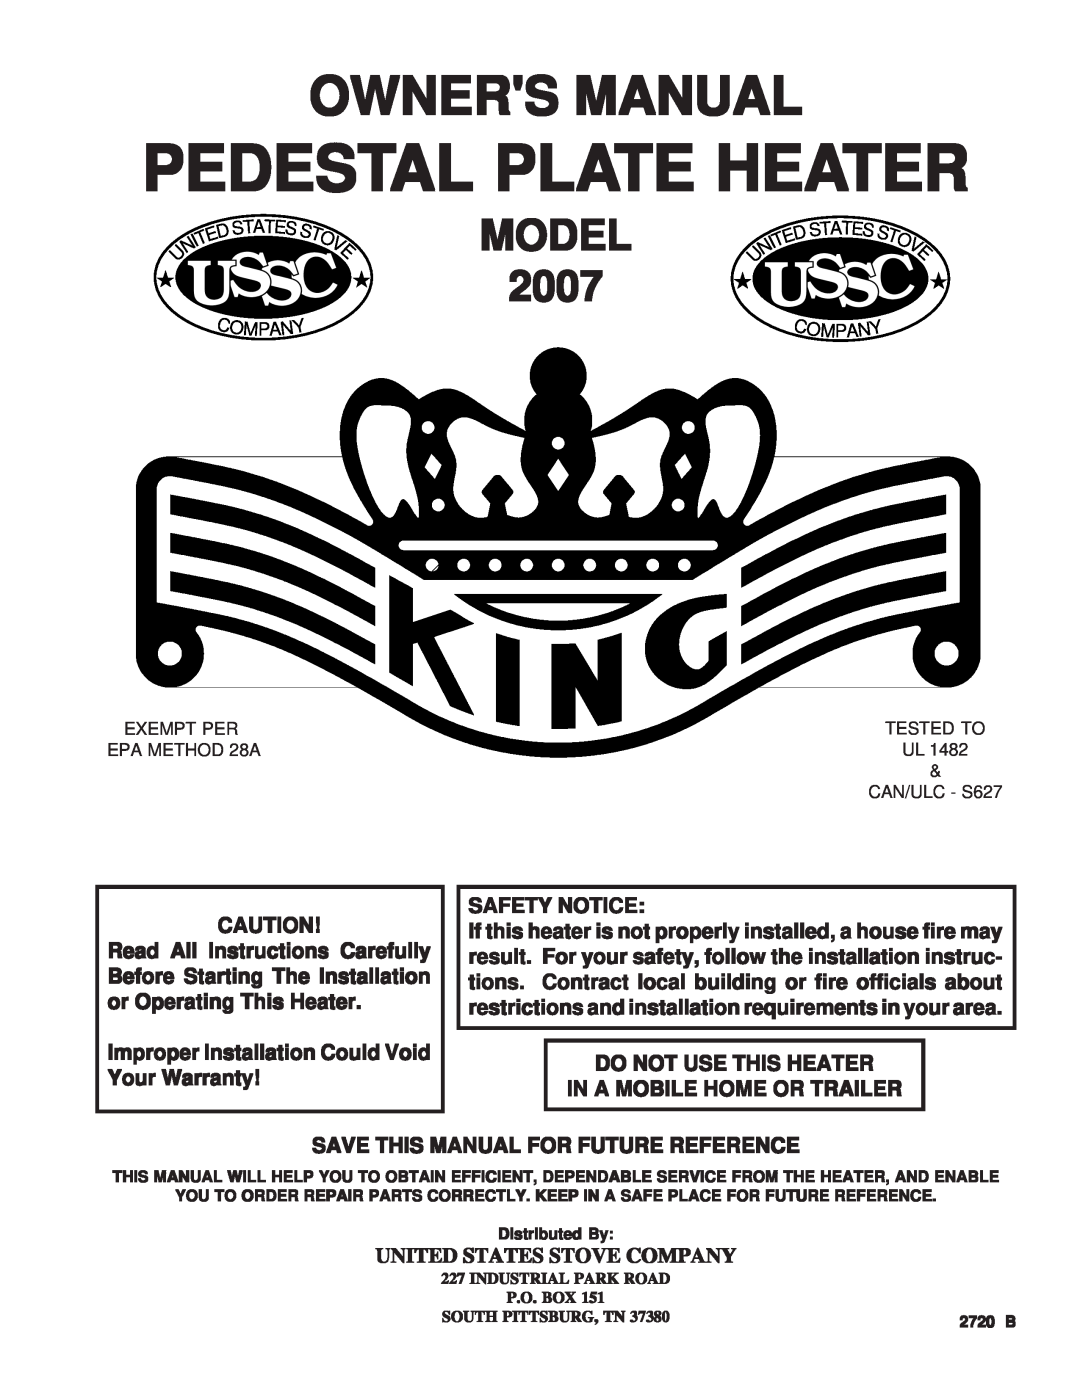 United States Stove 2007 owner manual Ussc, Pedestal Plate Heater, Model, United States Stove Company 